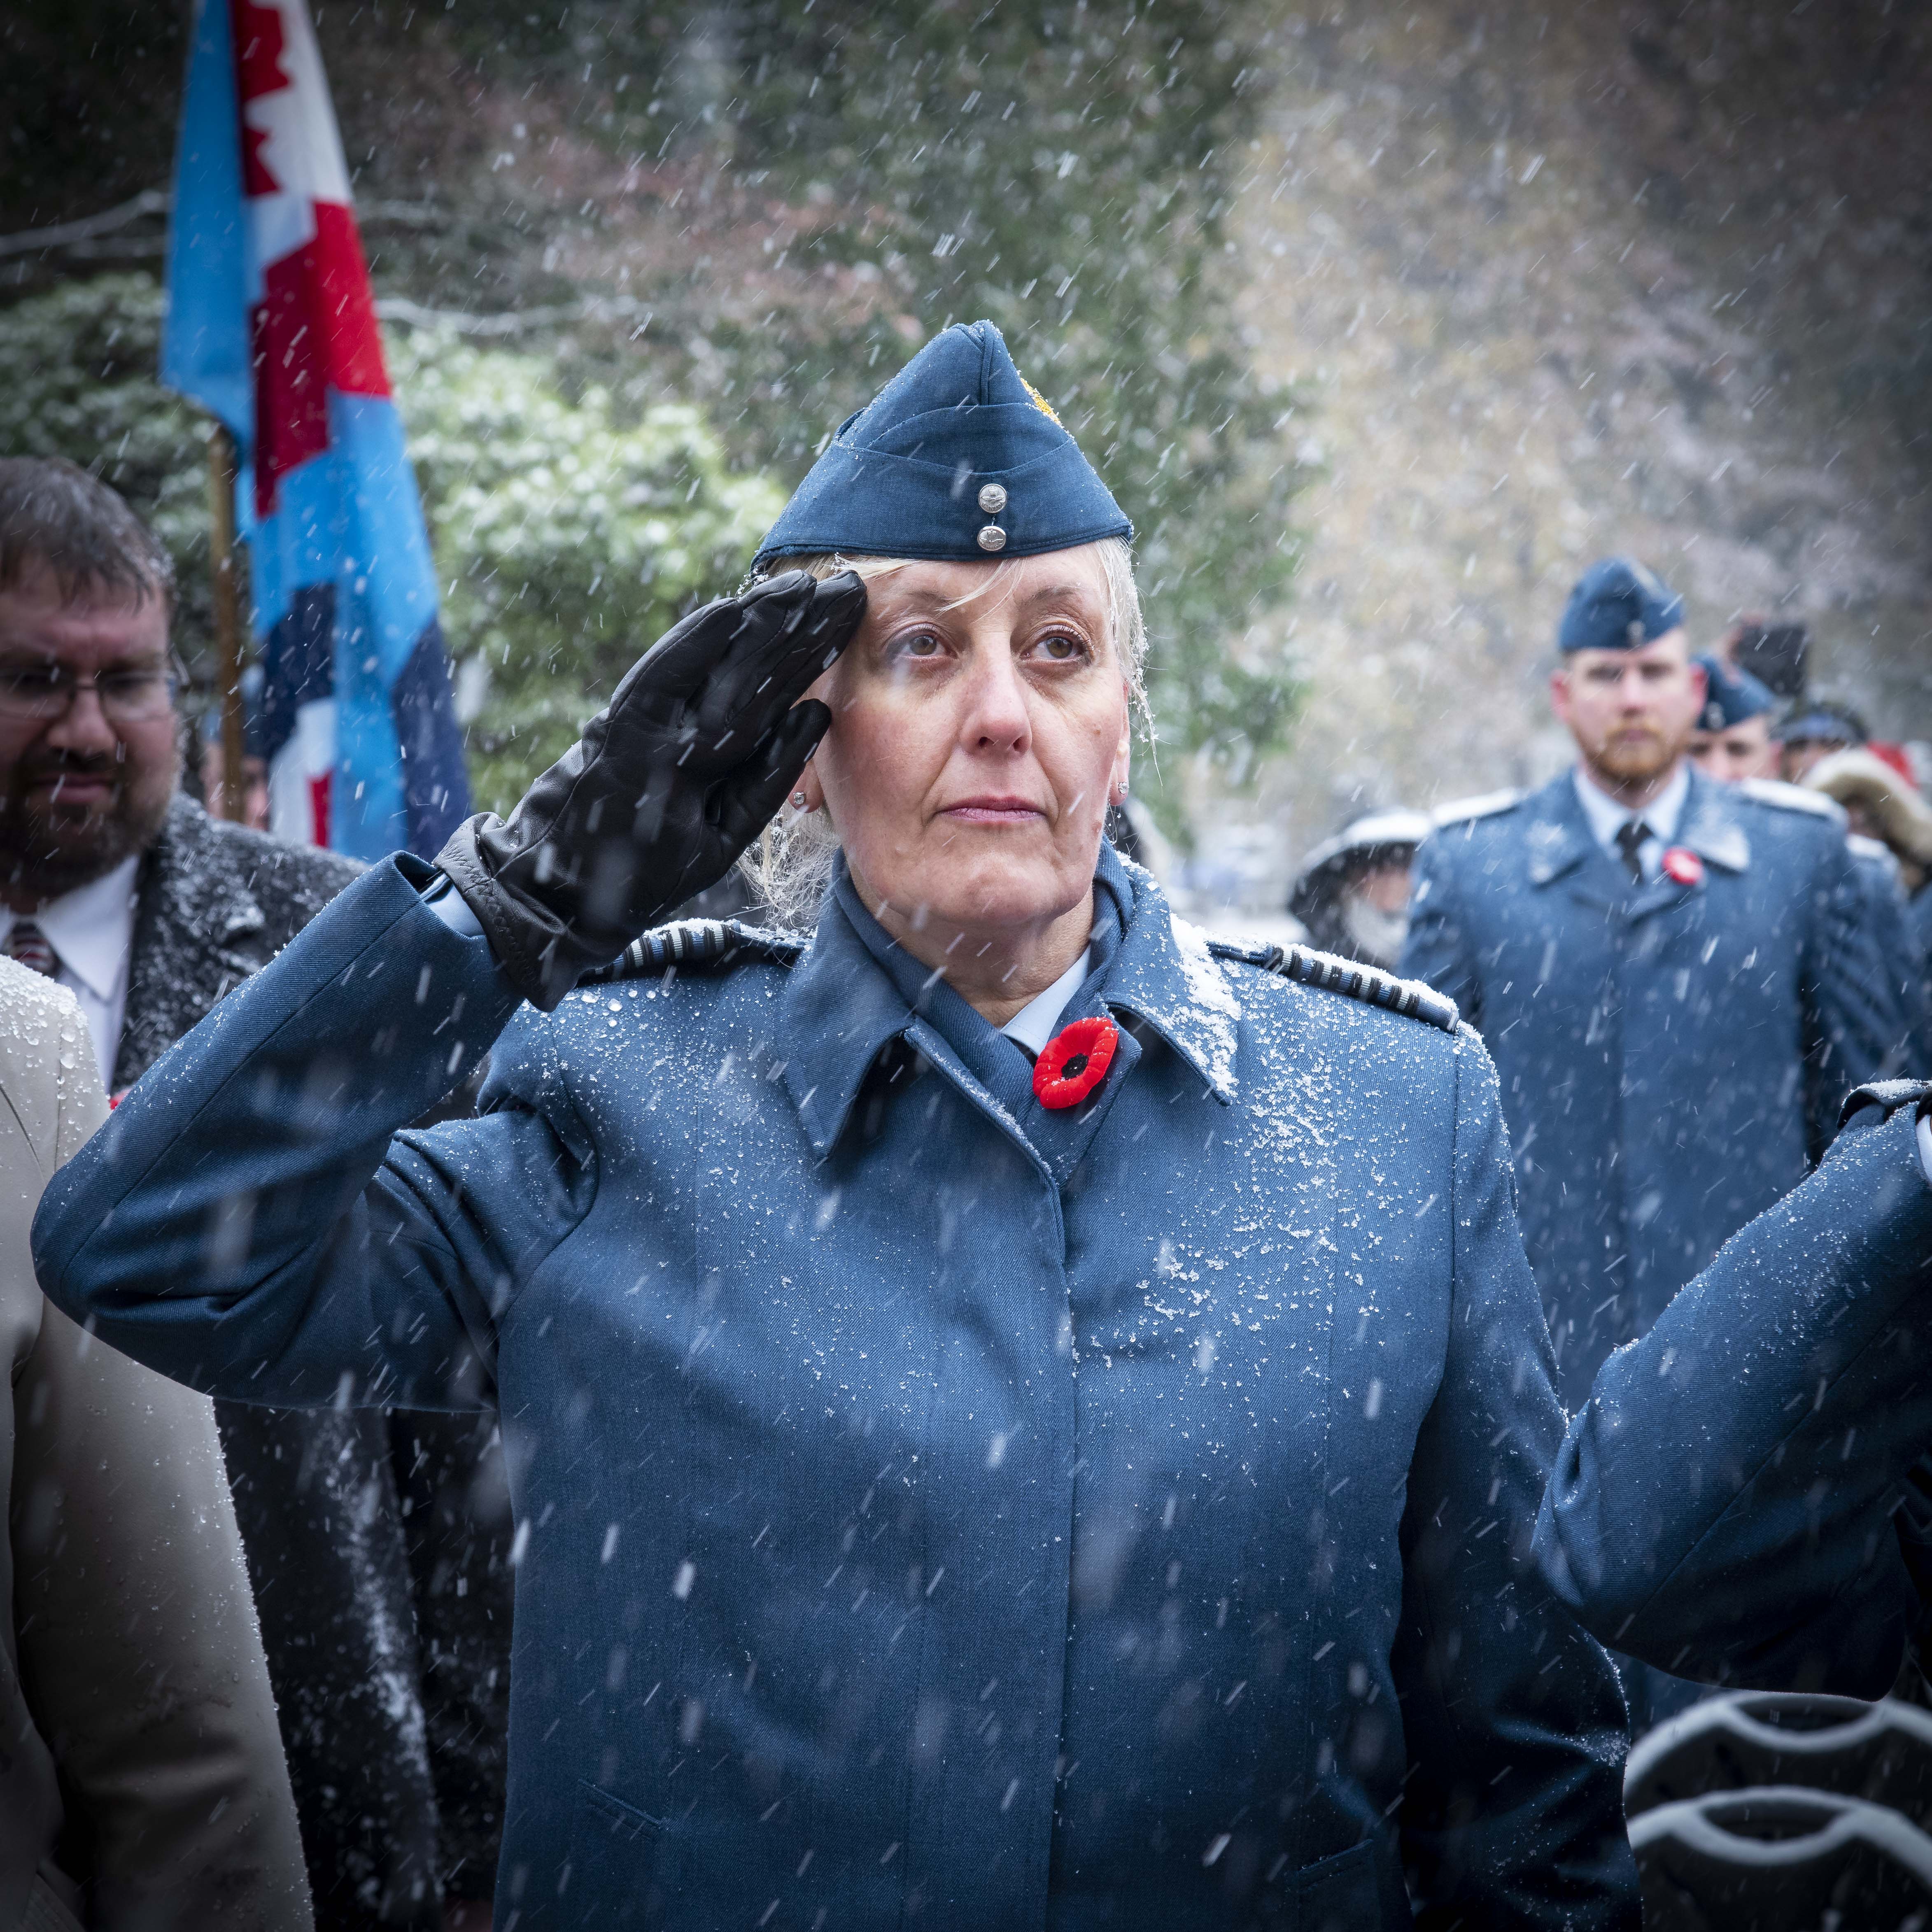 16 Wing’s Honorary Colonel Renee van Kessel salutes during the 2019 Remembrance Day ceremony held at the mausoleum where Wing Commander William Barker, VC, is interred in Mount Pleasant Cemetery, Toronto. PHOTO: Corporal Lynette Ai Dang, BM10-2019-0359-024